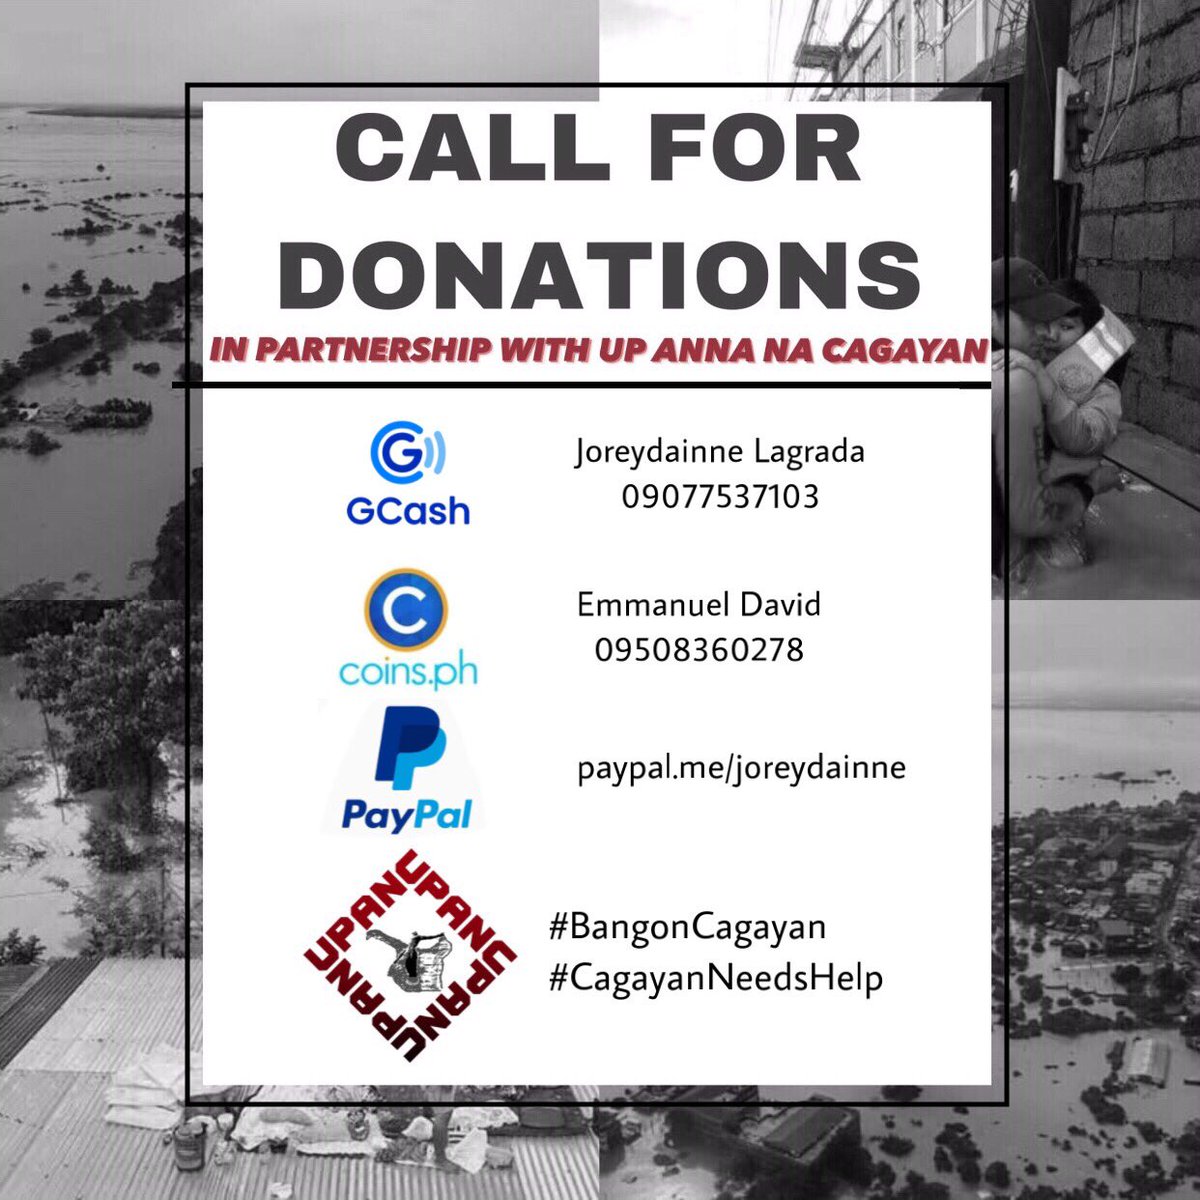 ‼️ REPOSTING ‼️

we are still accepting donations up until the last day of november. any amount will do. salamat po. 🤗

#BangonCagayan 
#CagayanNeedsHelp